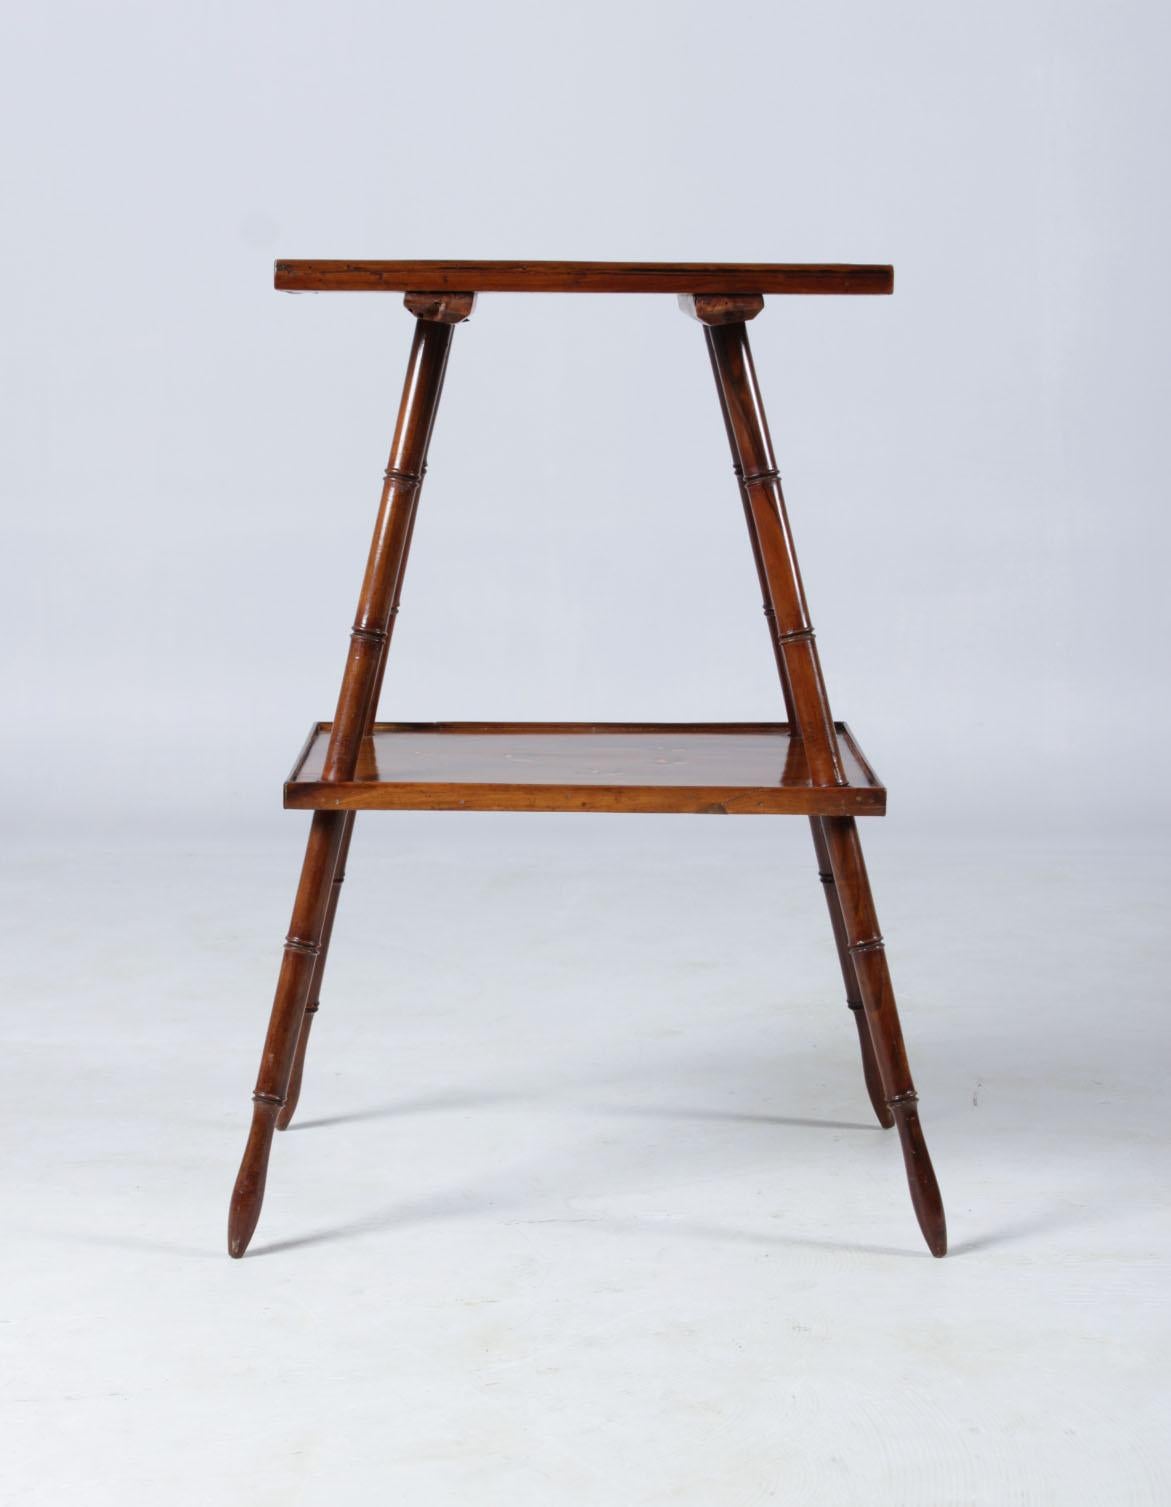 Fine antique etagere

France (?)
Fruitwood
Art Nouveau around 1910

Dimensions: H x W x D: 69 x 42 x 31 cm

Description:
Dainty side table with two shelves.
Strongly slanted legs, turned and reminiscent of bamboo wood.

The lower plate